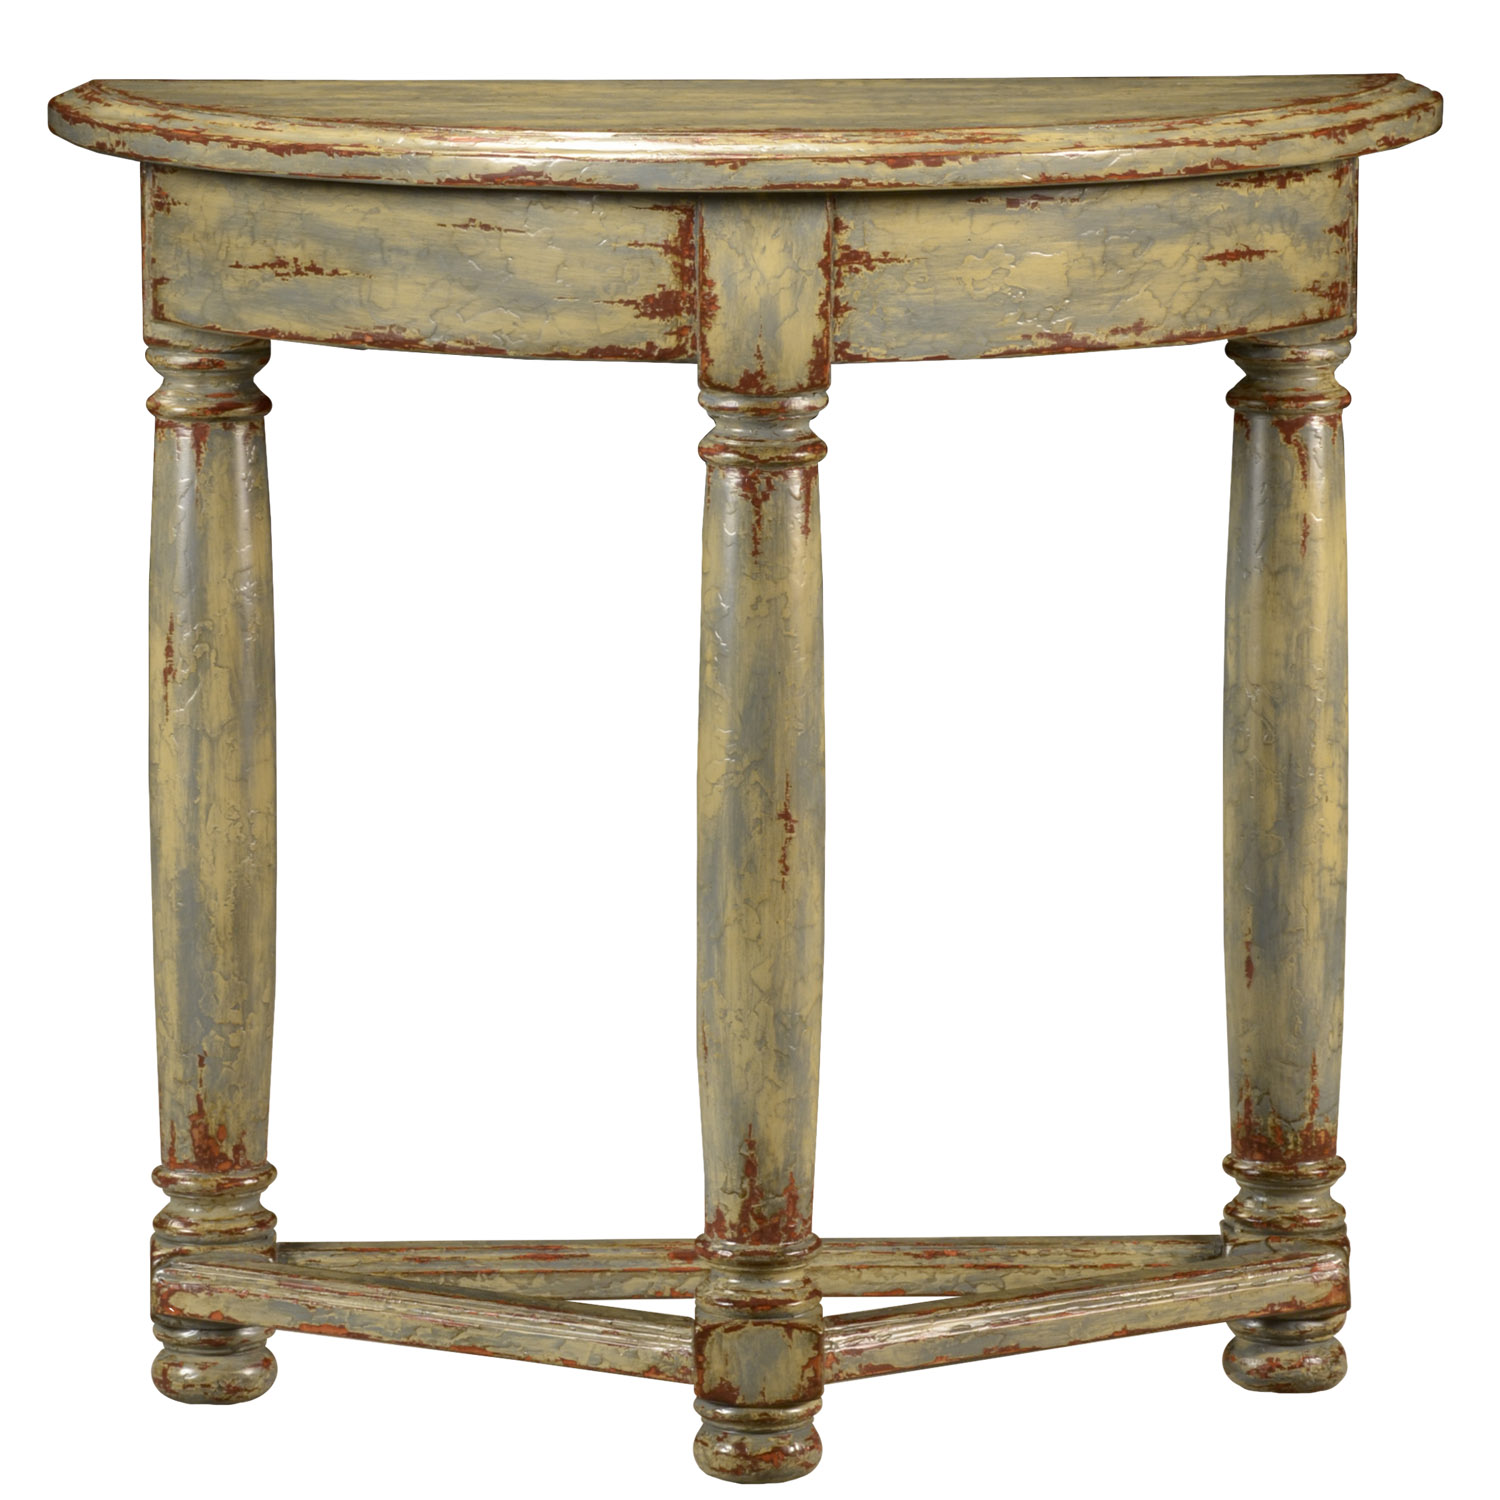 Cassia traditional demilune side table end table by Woodland furniture in Idaho Falls